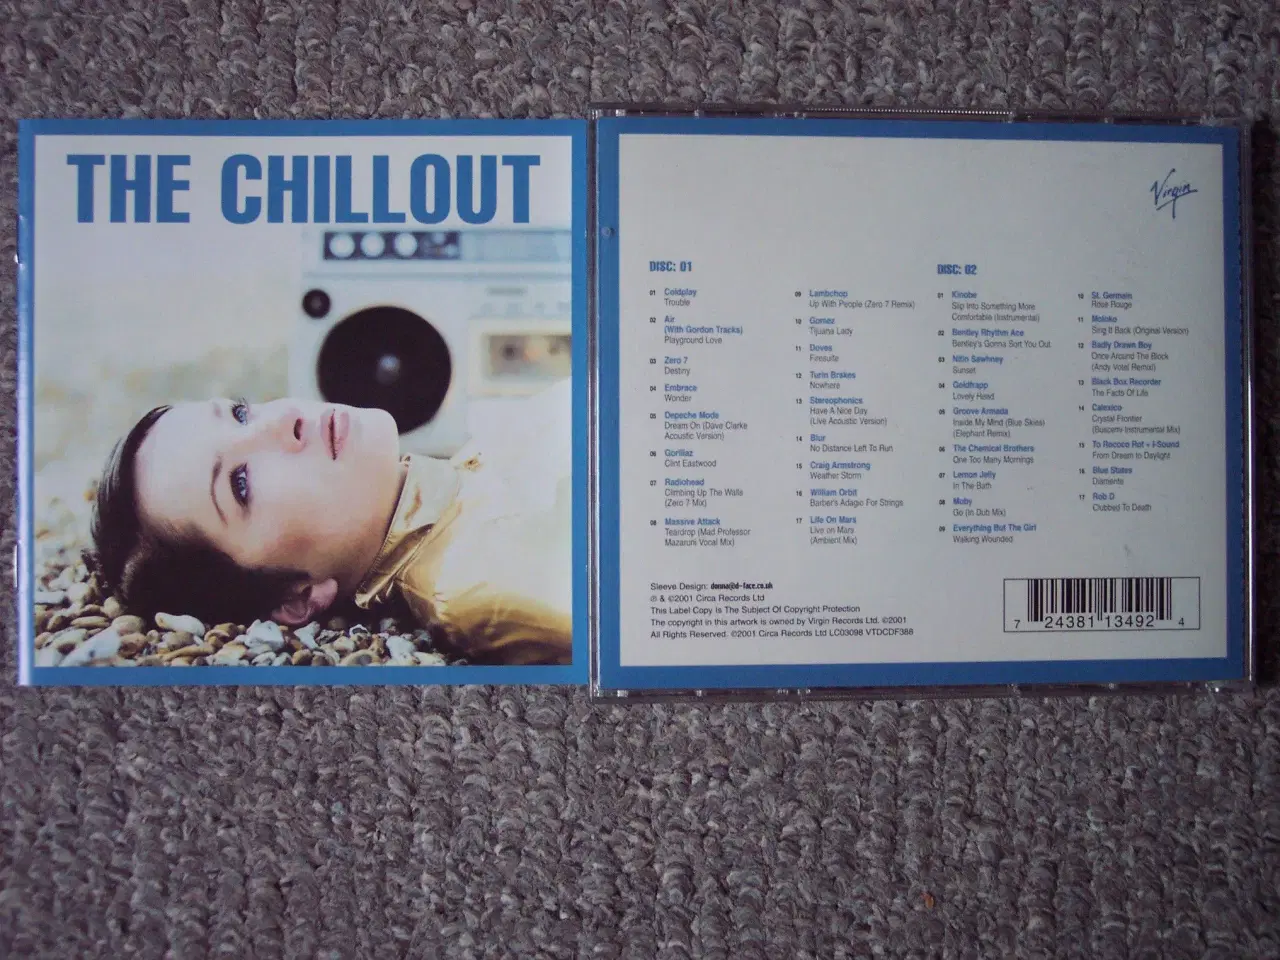 Billede 1 - Opsamling ** The Chillout (2-CD) (72438113492)